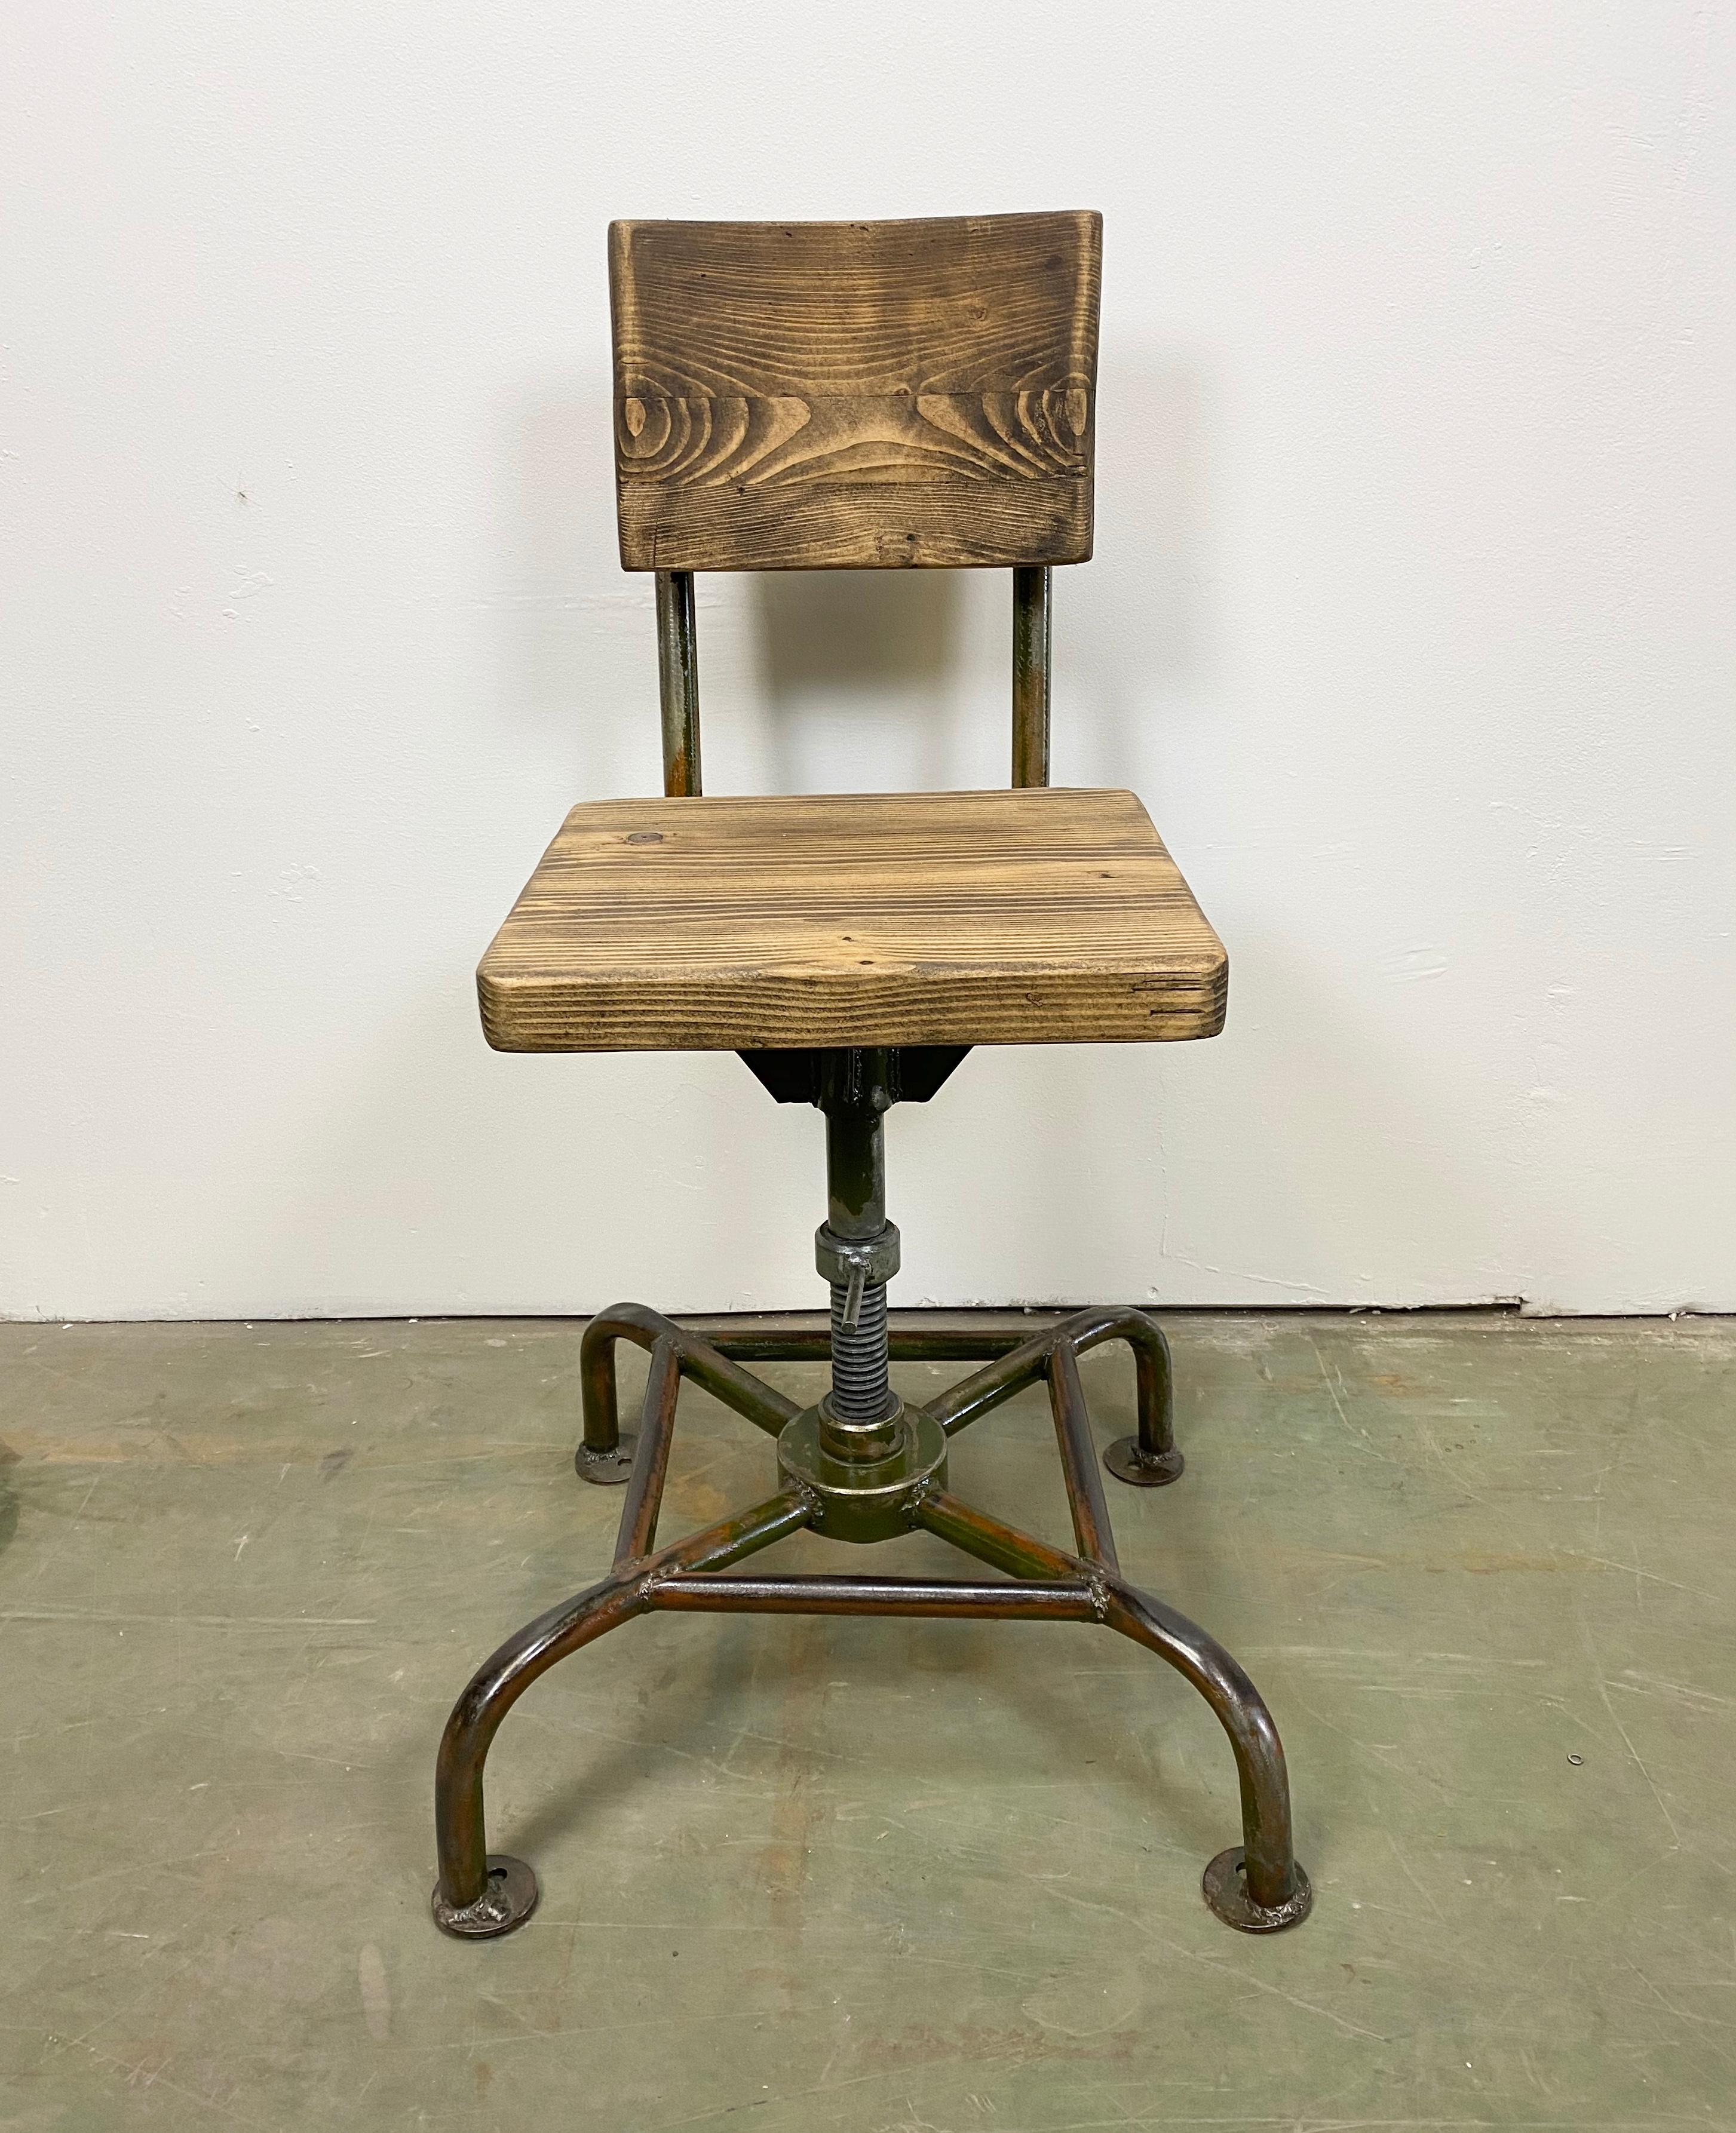 This industrial chair was made in former Czechoslovakia during the 1950s. It features an iron construction and a wooden seat and backrest. The chair is in very good vintage condition. Weight of the chair is 16 kg.
Additional dimensions:
Total